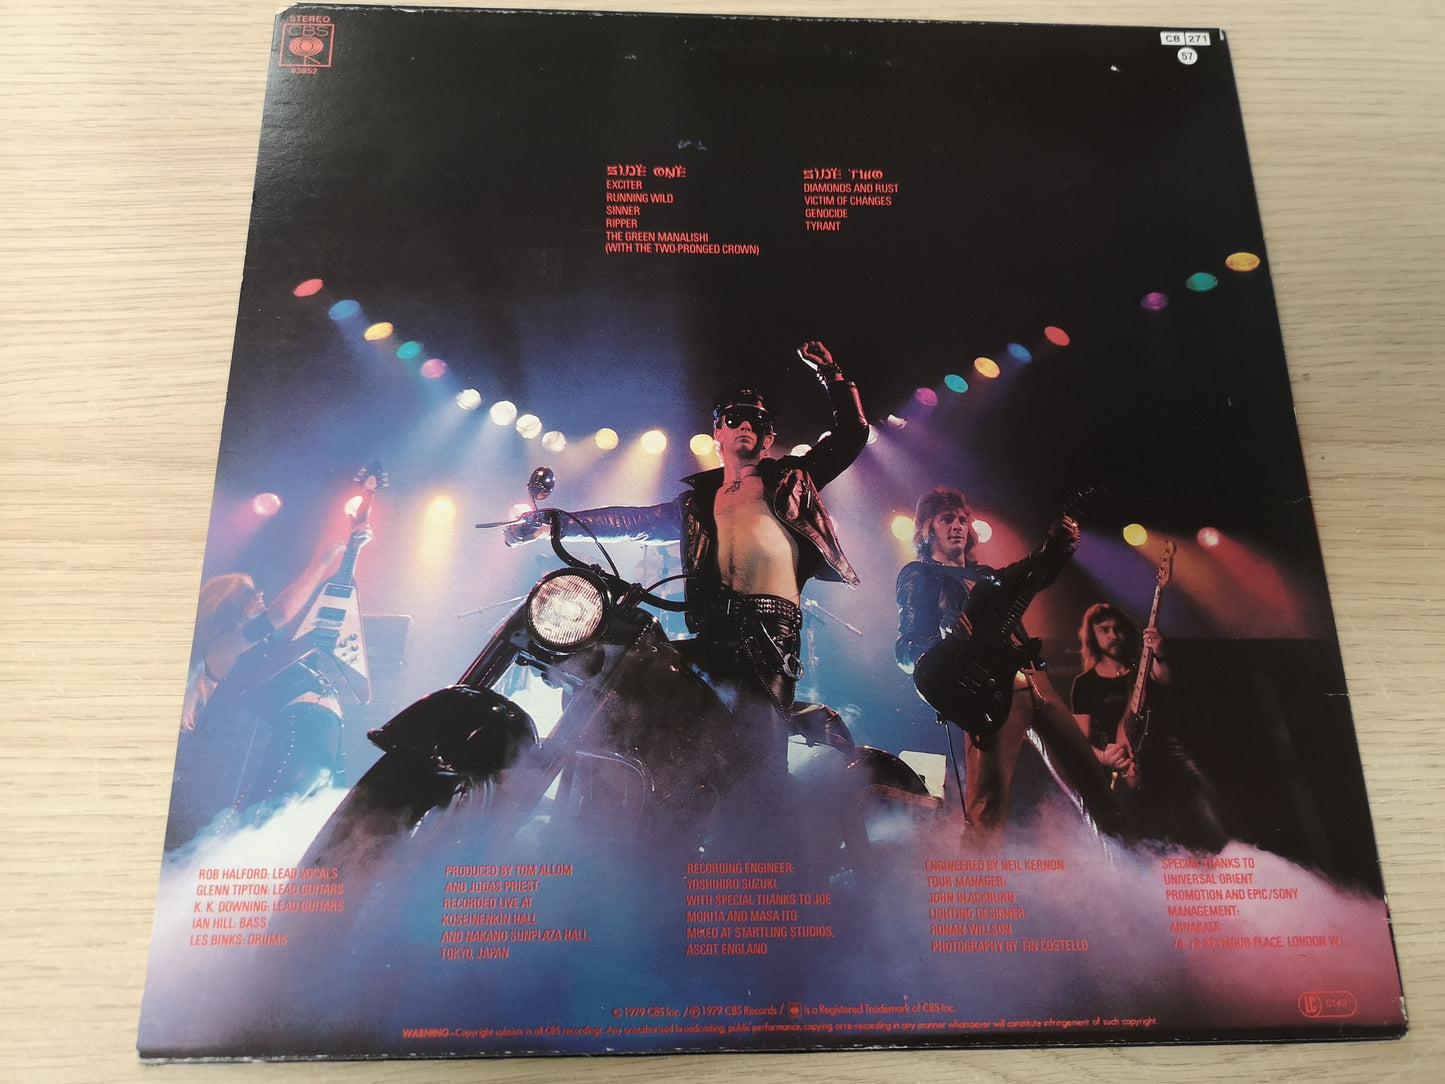 Judas Priest "Unleashed in The East" Orig Holland 1979 VG++/EX